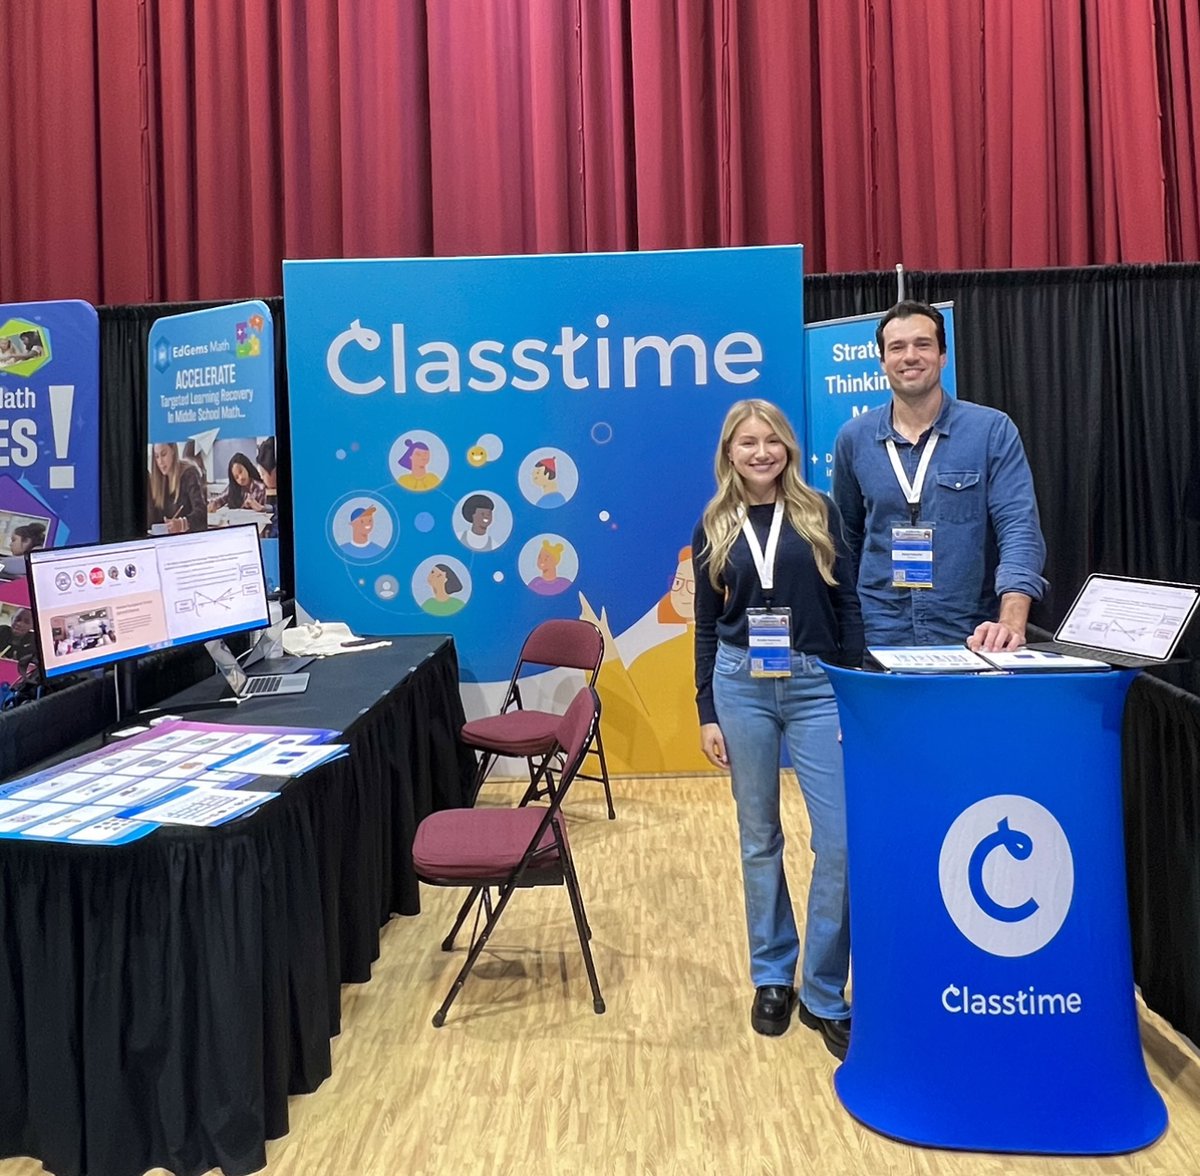 Thank you to all of the educators who stopped by our booth at the #CMCCentral conference to learn about the work we are doing with California districts on Strategic Thinking in Math! @CAMathCouncil #Classtime